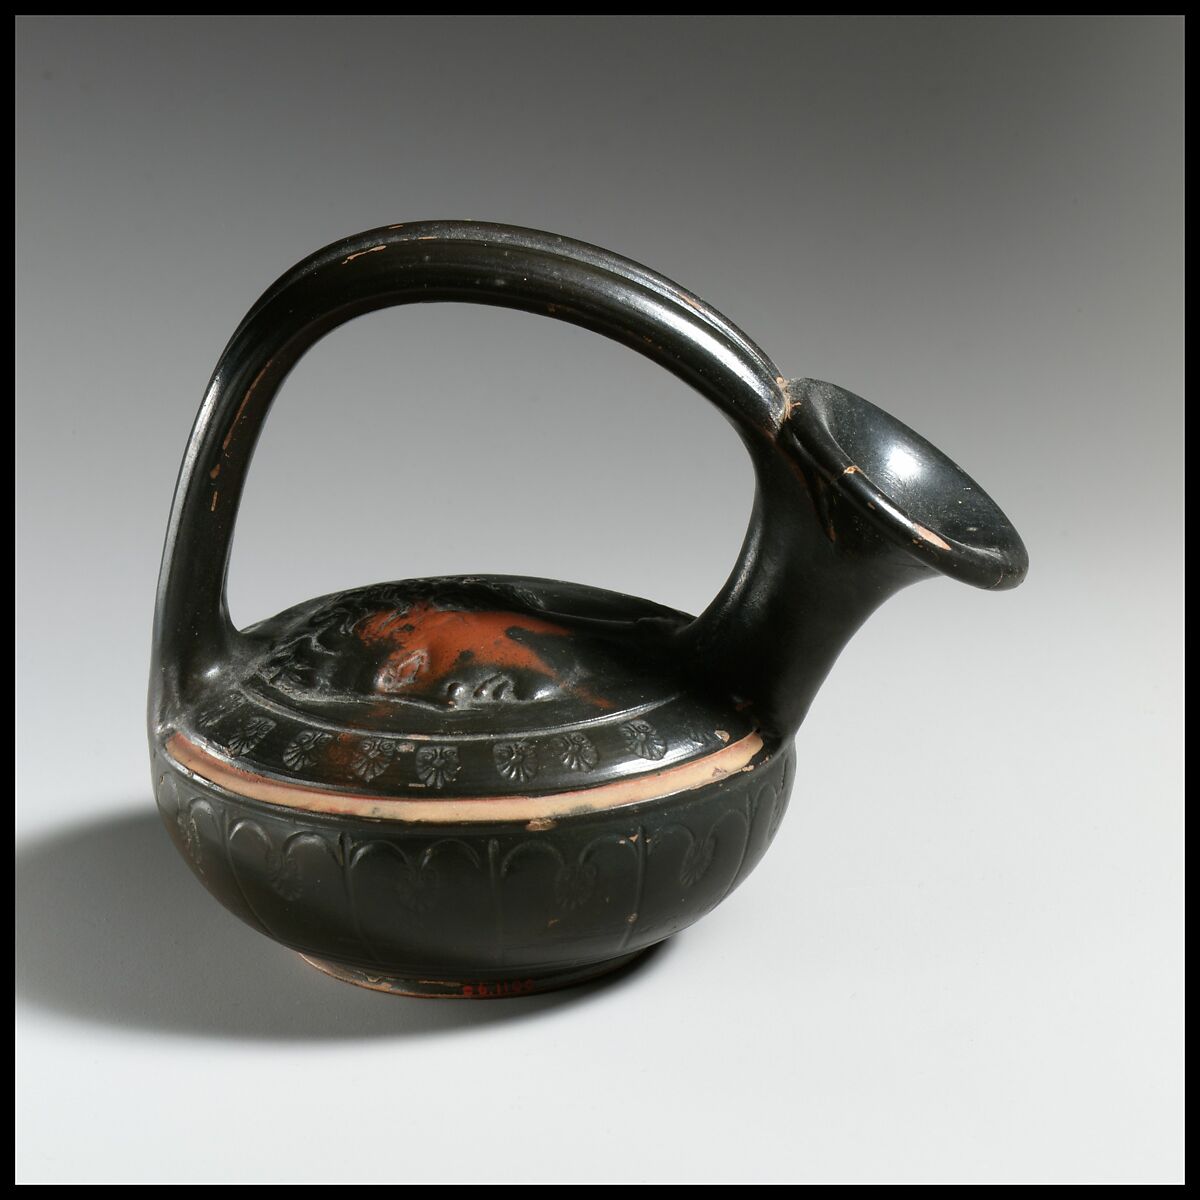 Terracotta askos (flask with a spout and handle over the top), Terracotta, Greek, South Italian, Campanian 